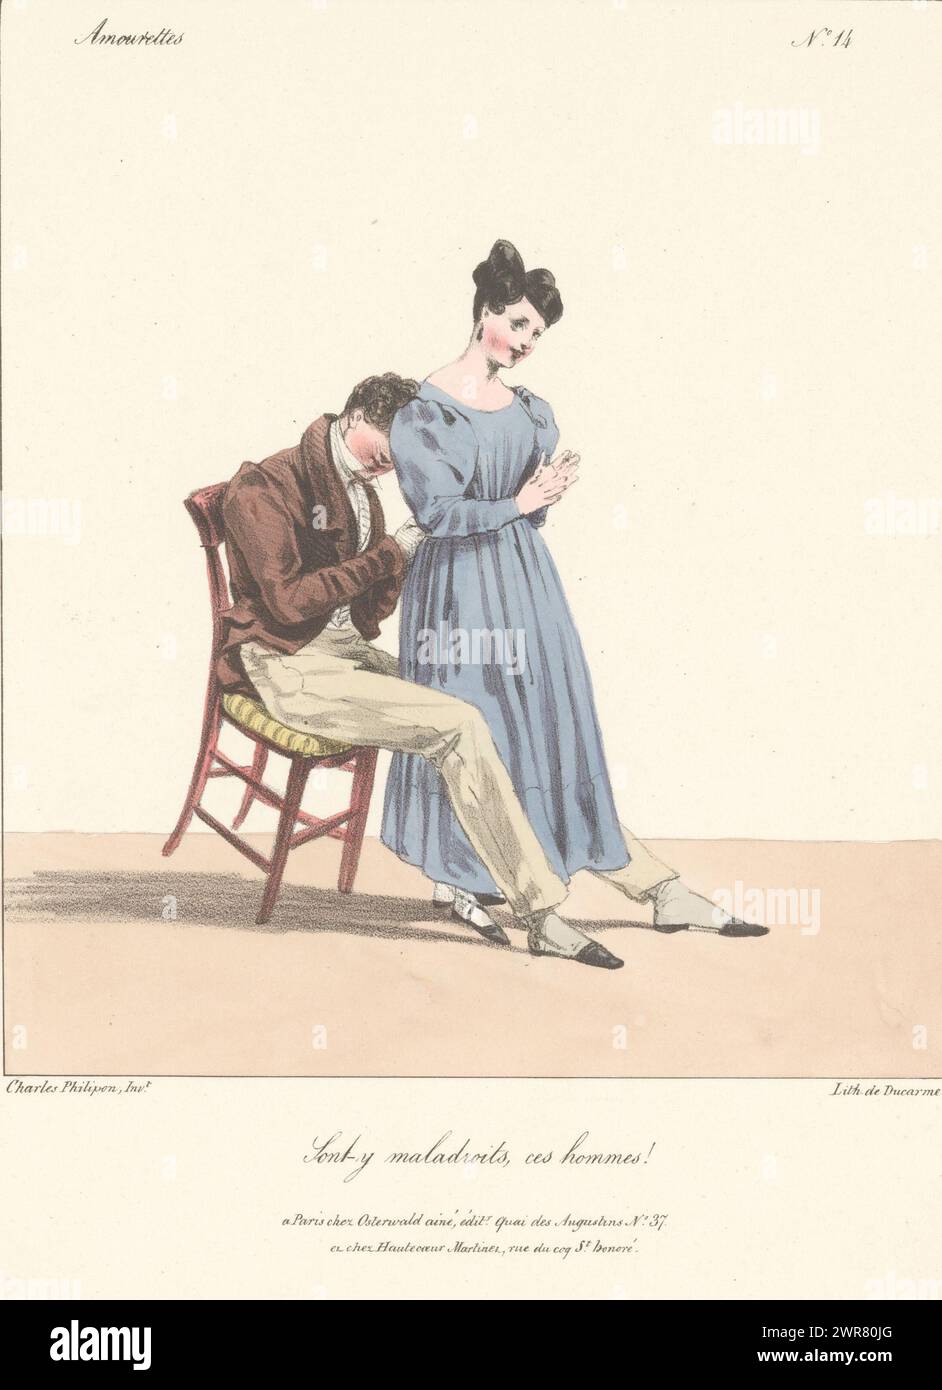 Man helps woman fasten her dress, Sont-y maladroits, ces hommes! (title on object), Love scenes (series title), Amourettes (series title on object), print maker: Charles Philipon, after design by: Charles Philipon, printer: Pierre François Ducarme, Paris, 1827 - 1829, paper, height 294 mm × width 220 mm, print Stock Photo